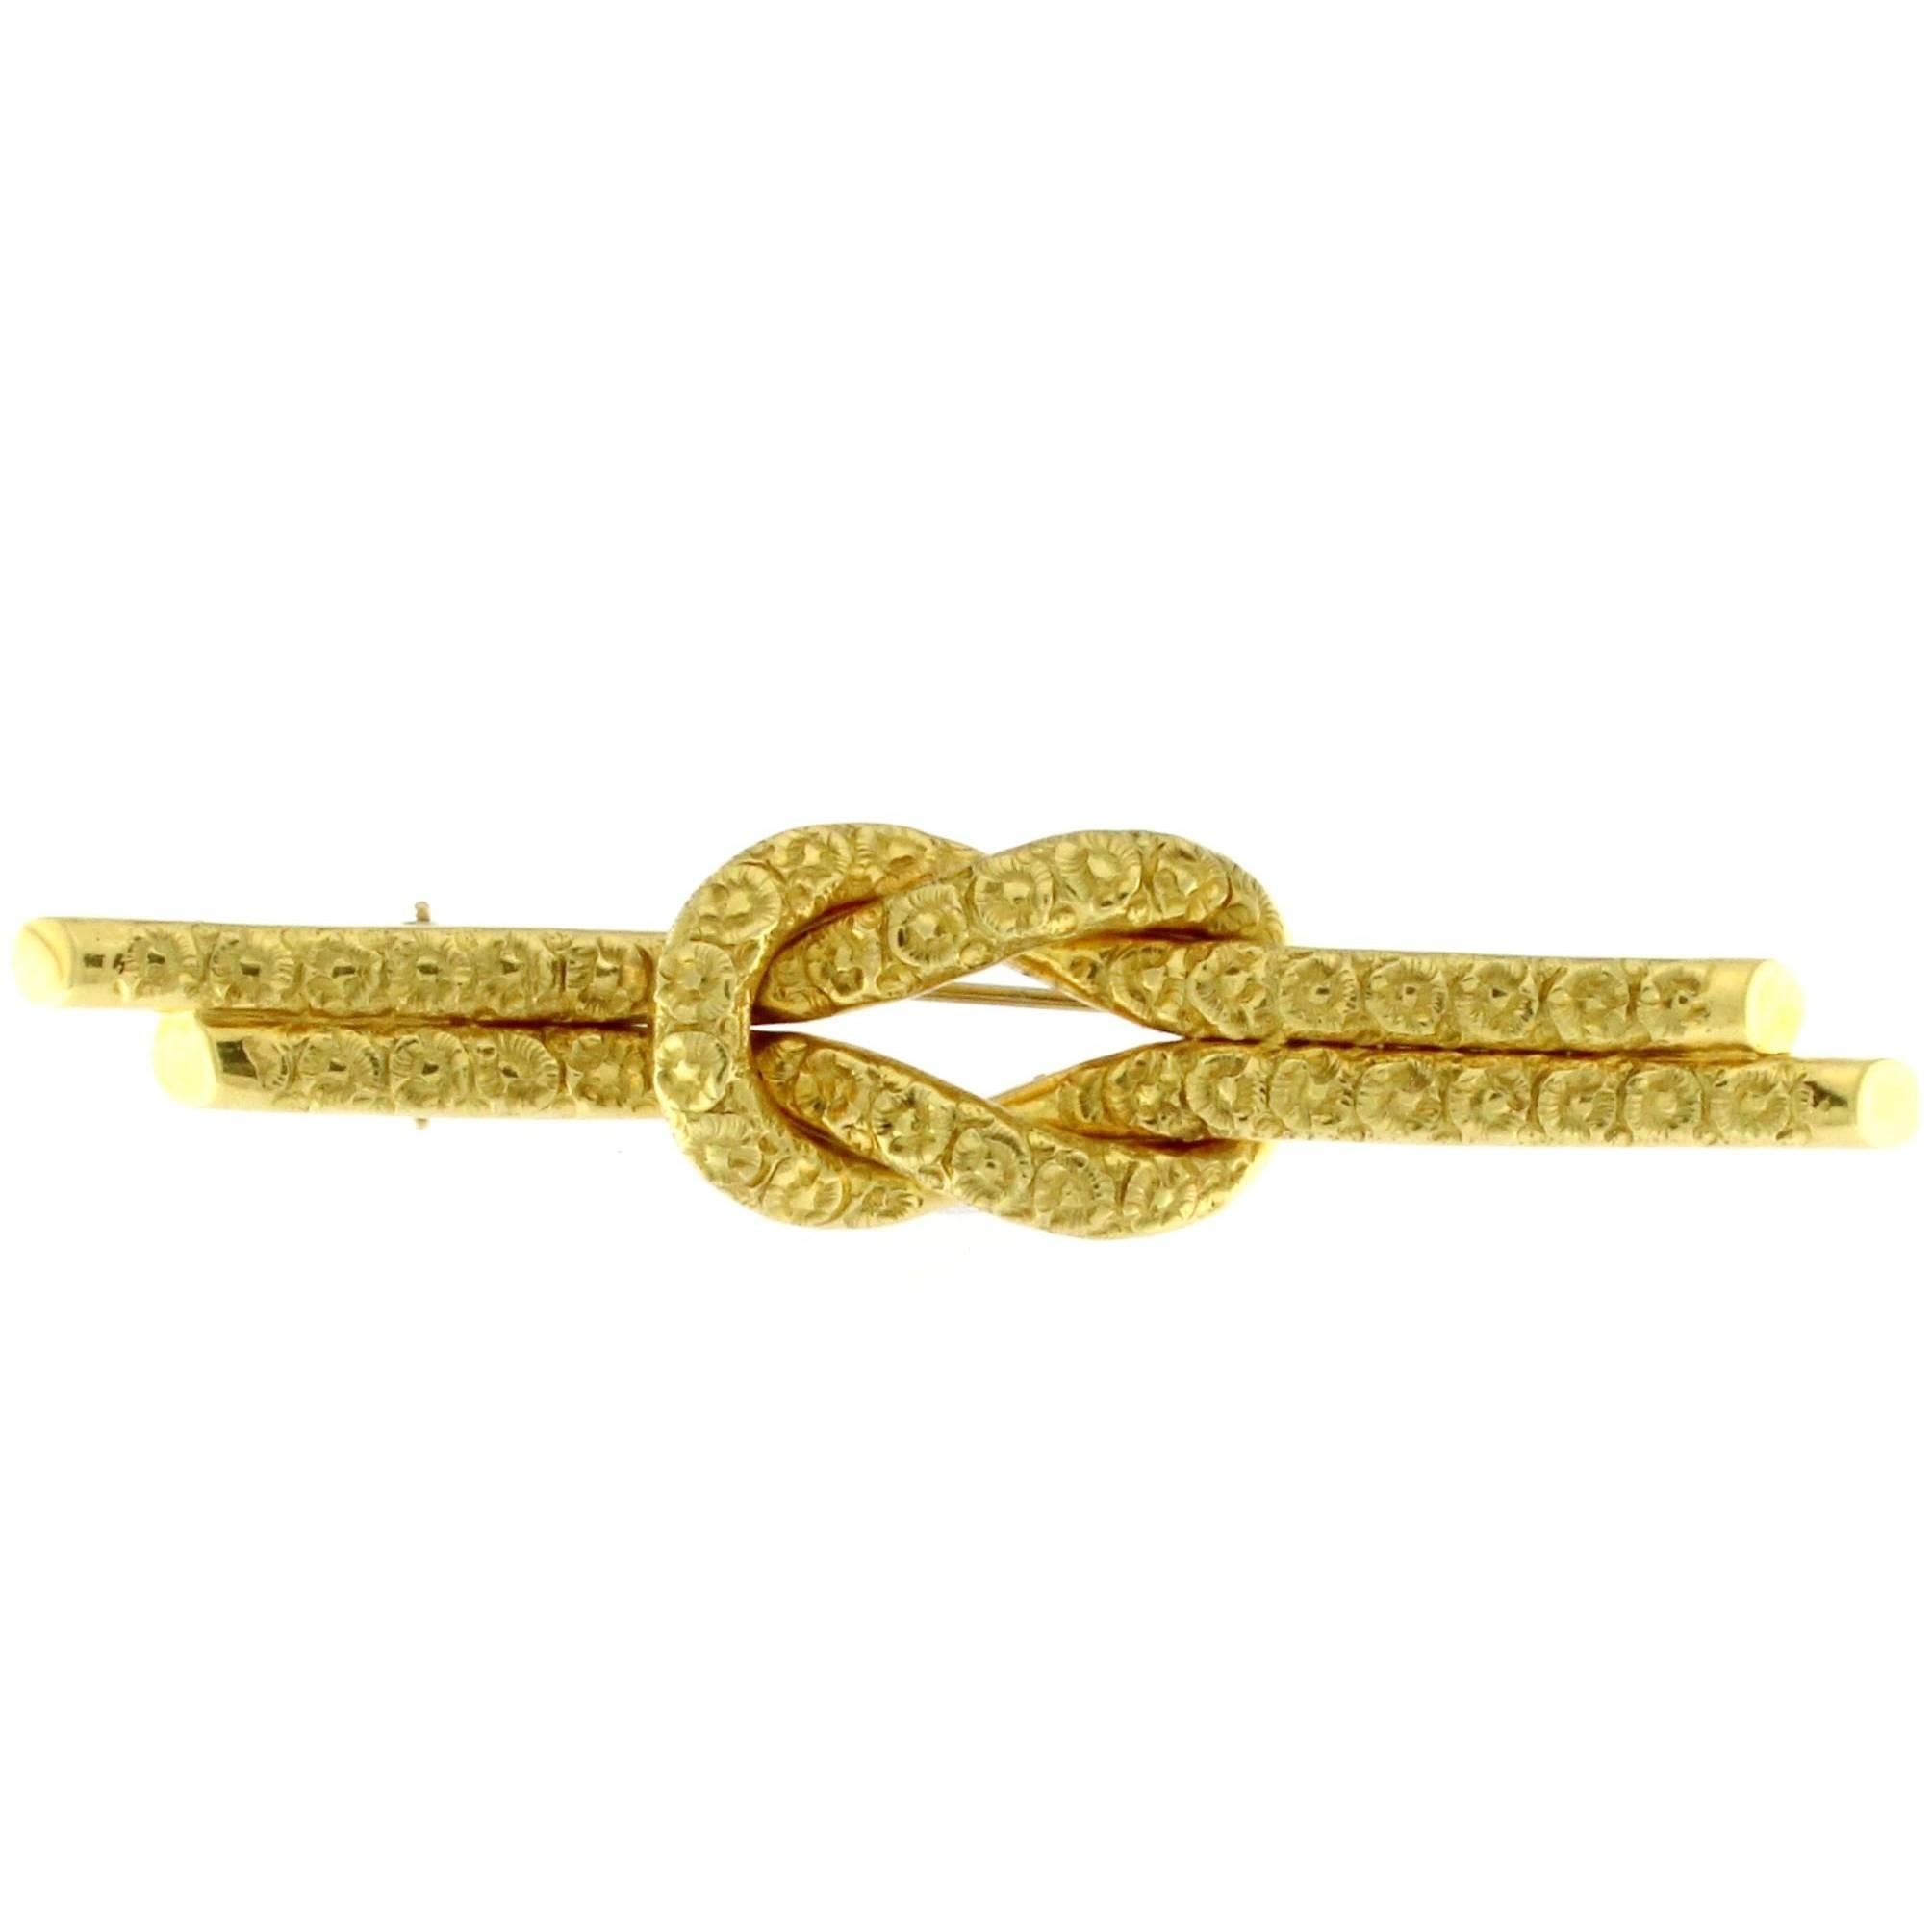 Chiselled Brooch in Yellow Gold 18 Karat